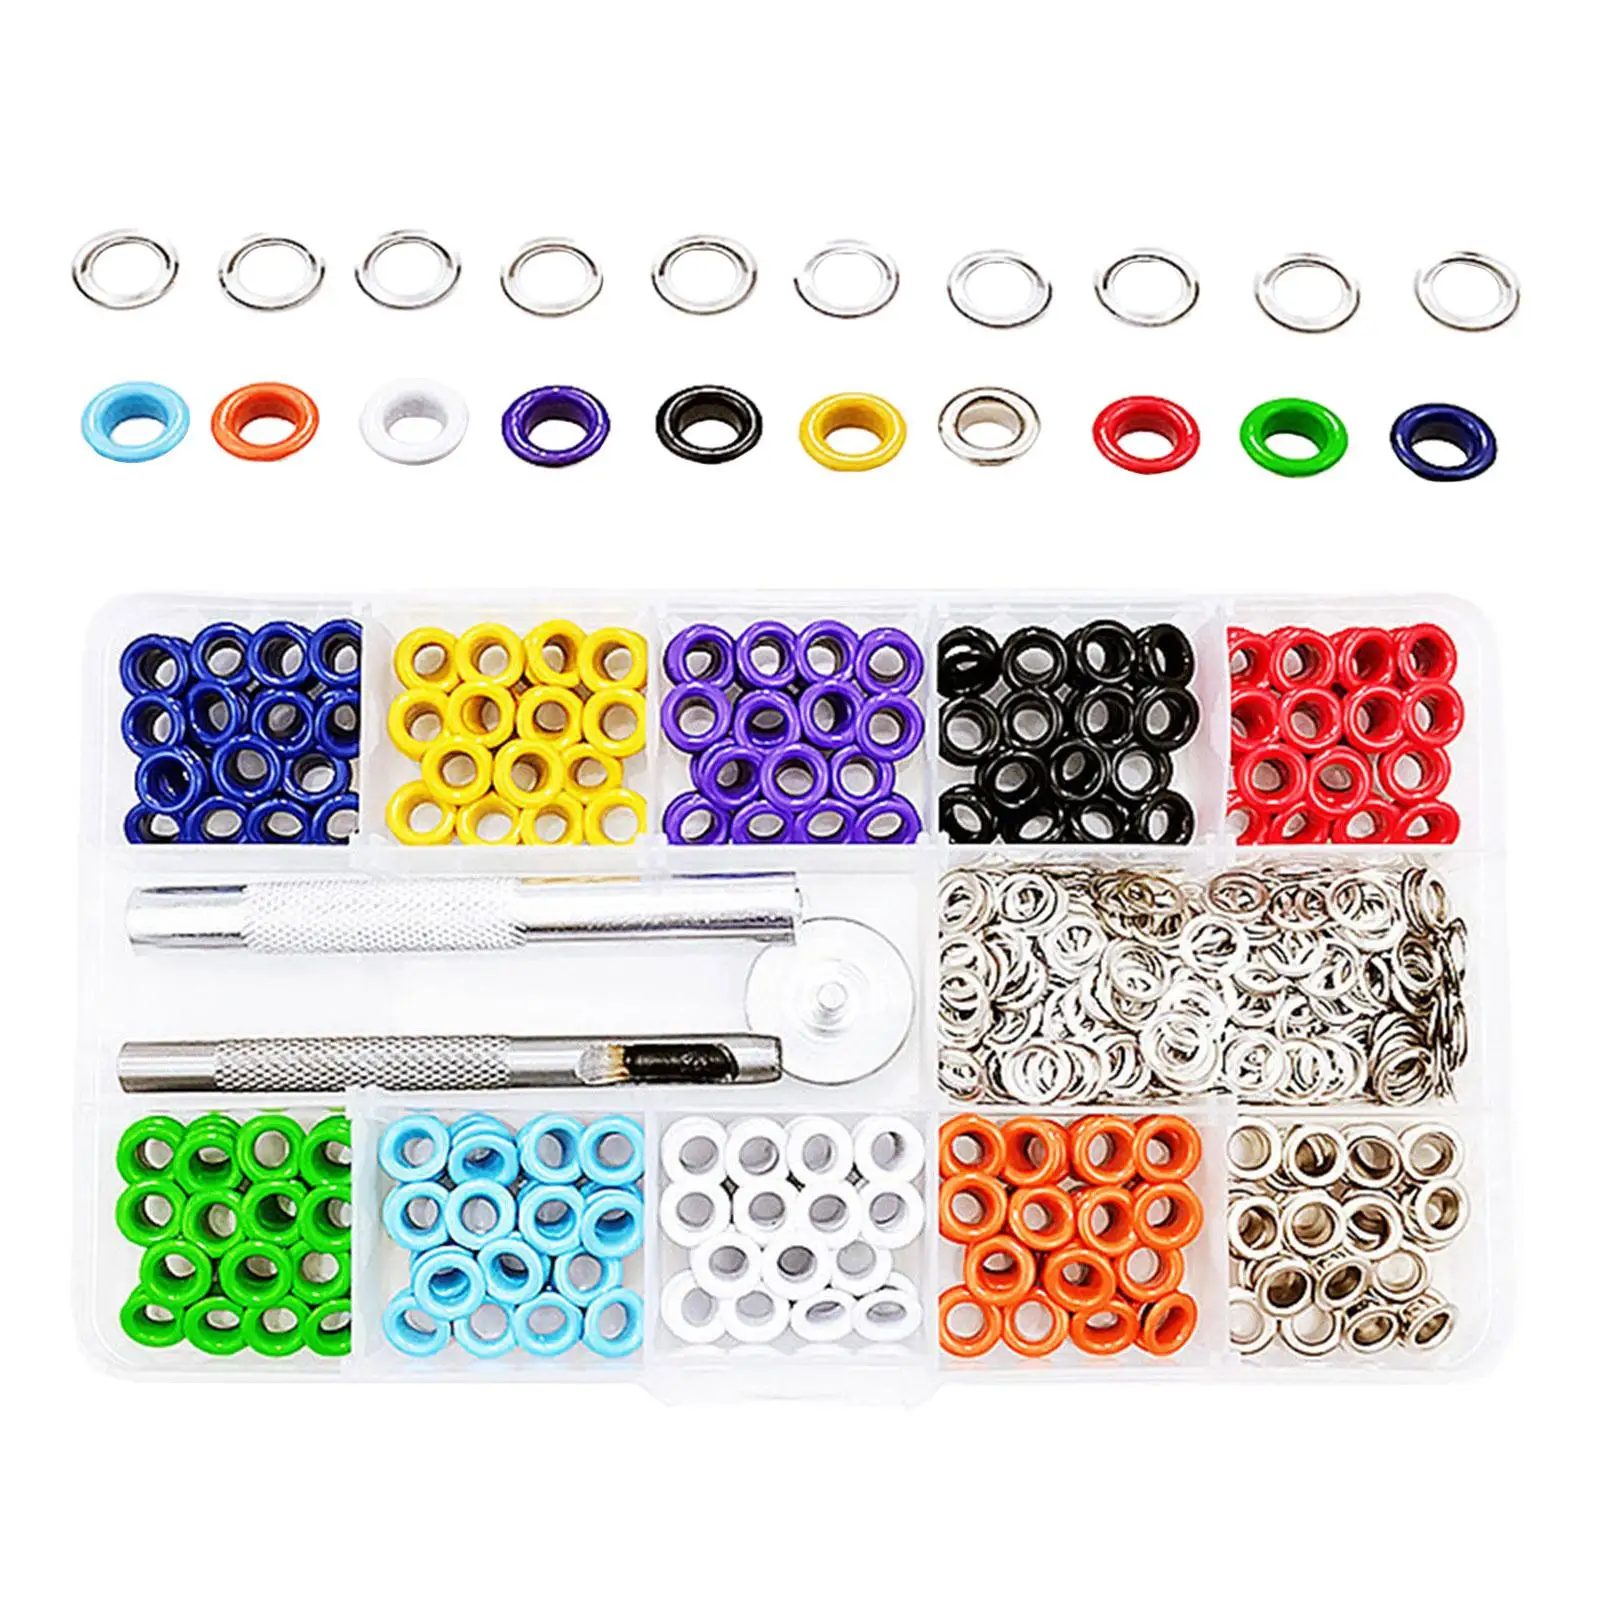 Grommet Tool Kit with Washers Metal Eyelets Grommet Kit Setting Tool for Fabrics Handbag Marine Canvas Paper Crafts Canvas